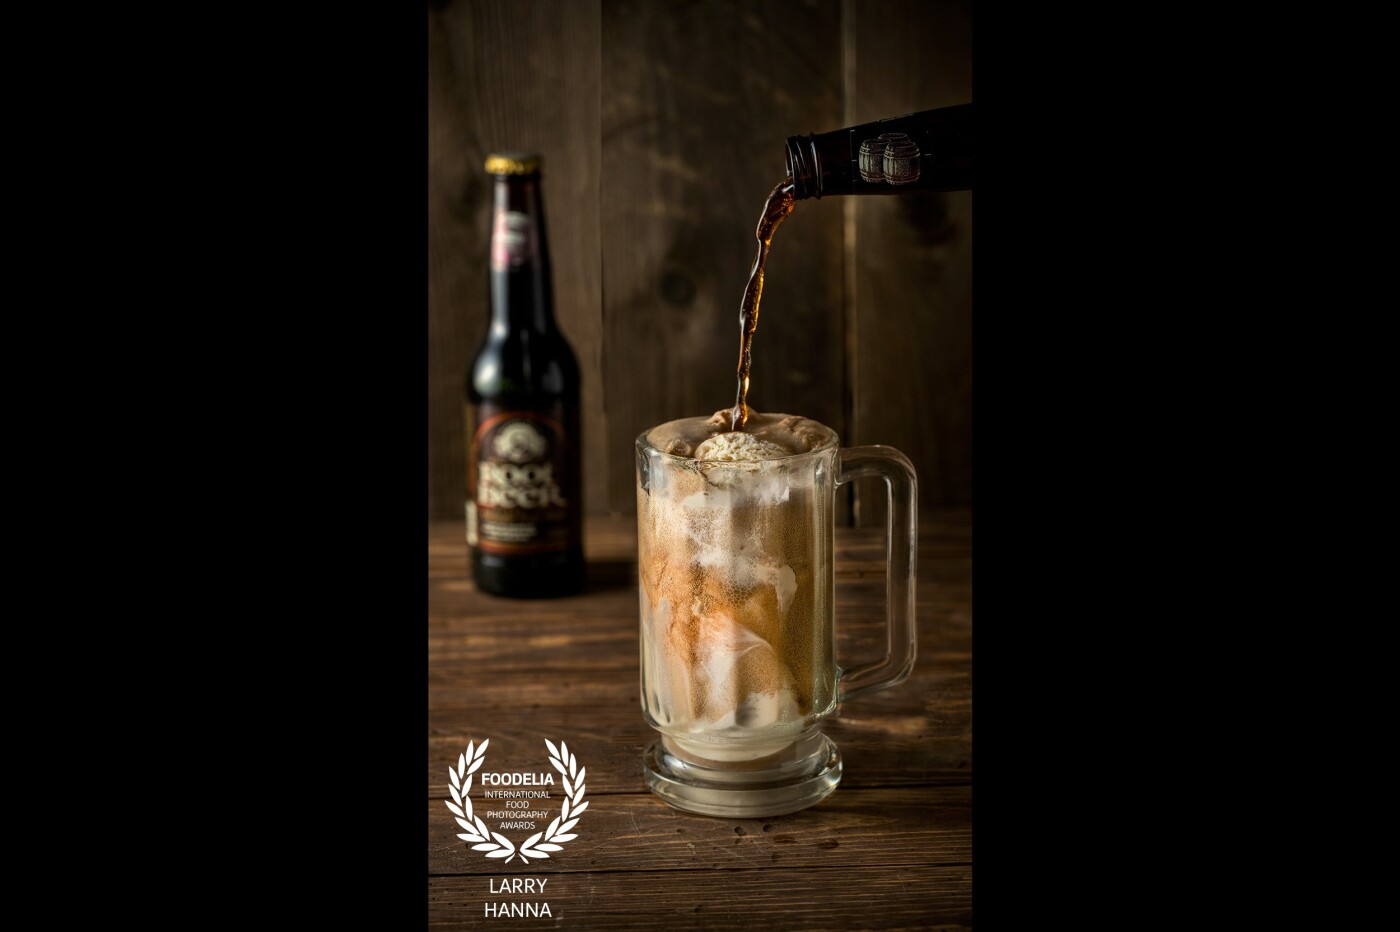 Who doesn't like a root beer float?  I created this photo for my own portfolio.  This image was created in my studio using short-duration flash to freeze the action.  The image was processed in Photoshop.